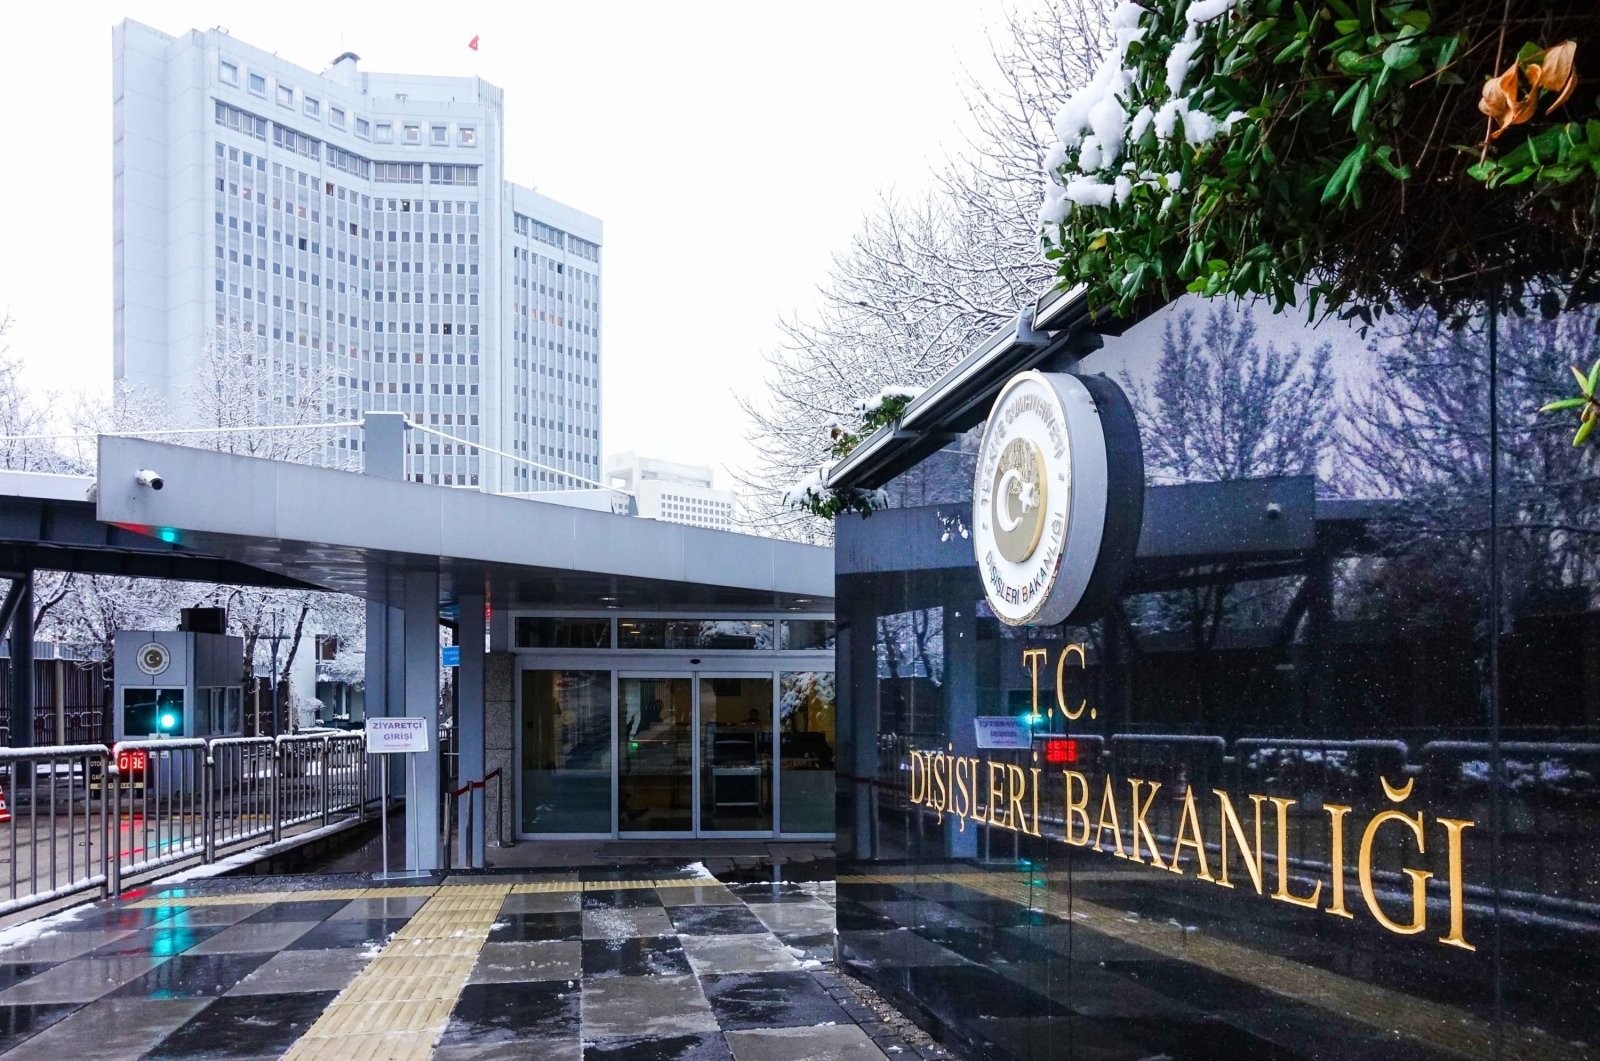 The Ministry of Foreign Affairs in the capital Ankara, Turkey.